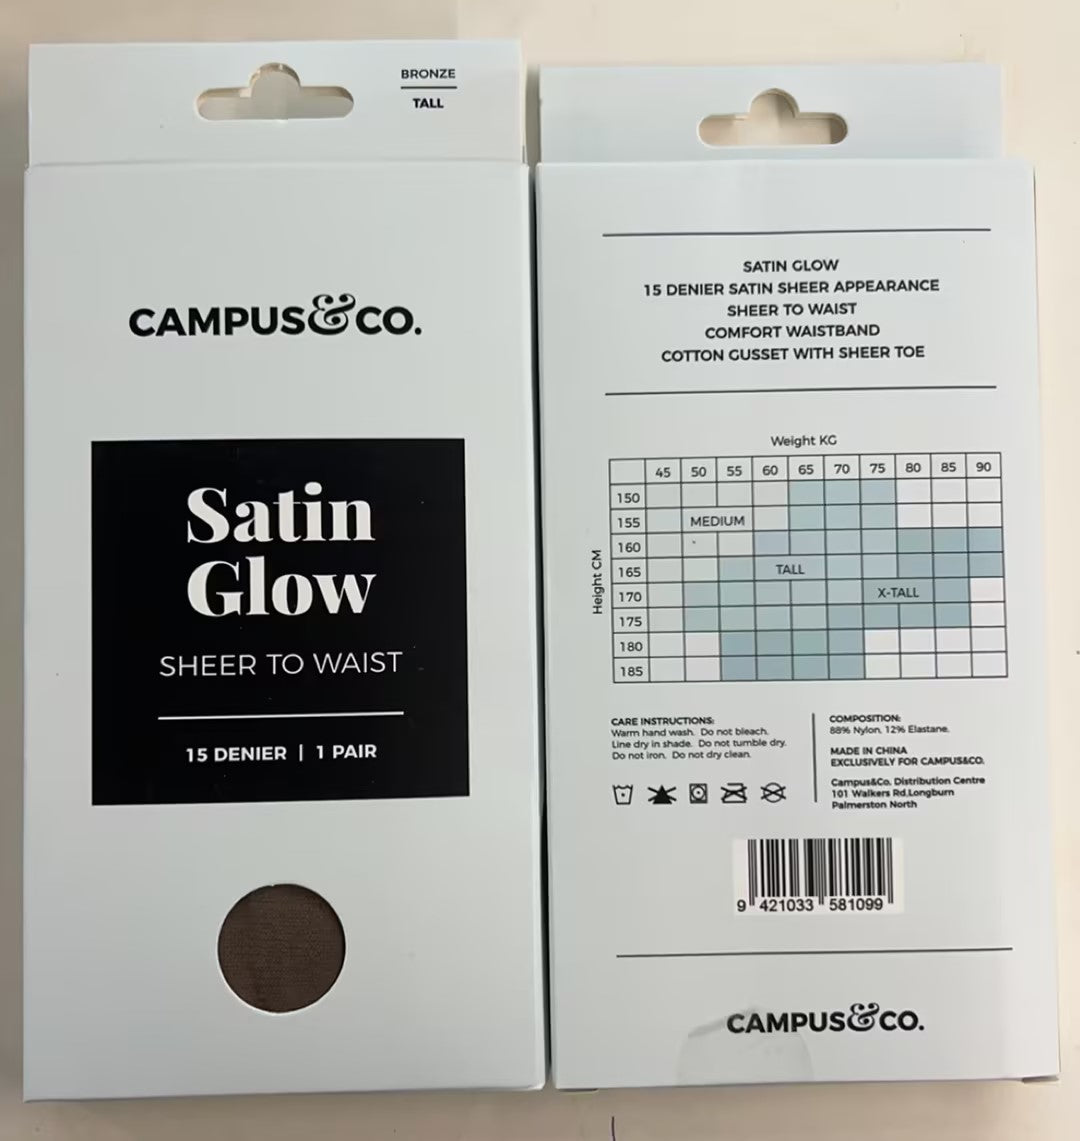 Campus&Co. Satin Glow Bronze Sheer to Waist Extra Tall (Case of 10)